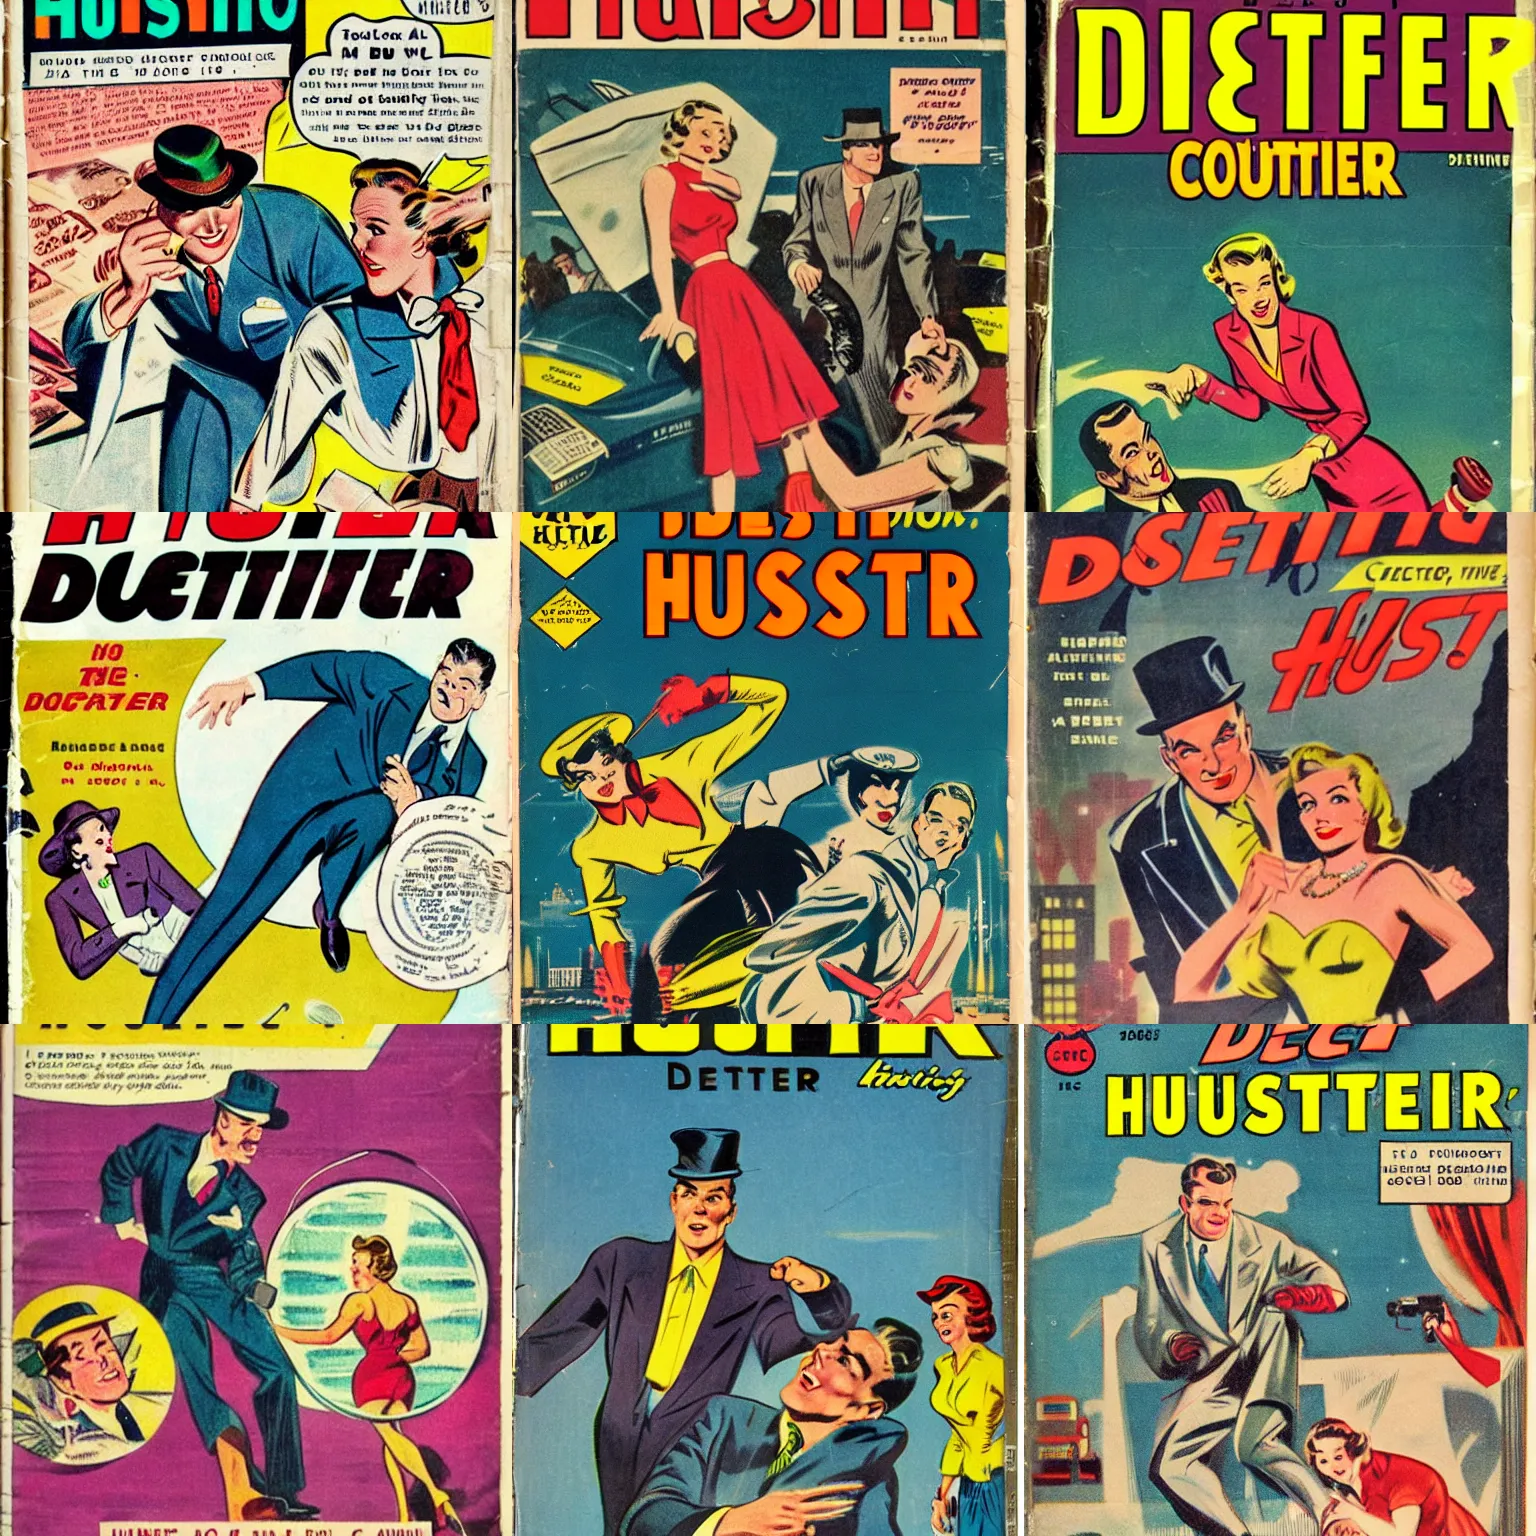 Prompt: 1 9 5 0's dectective comic, called the hustler